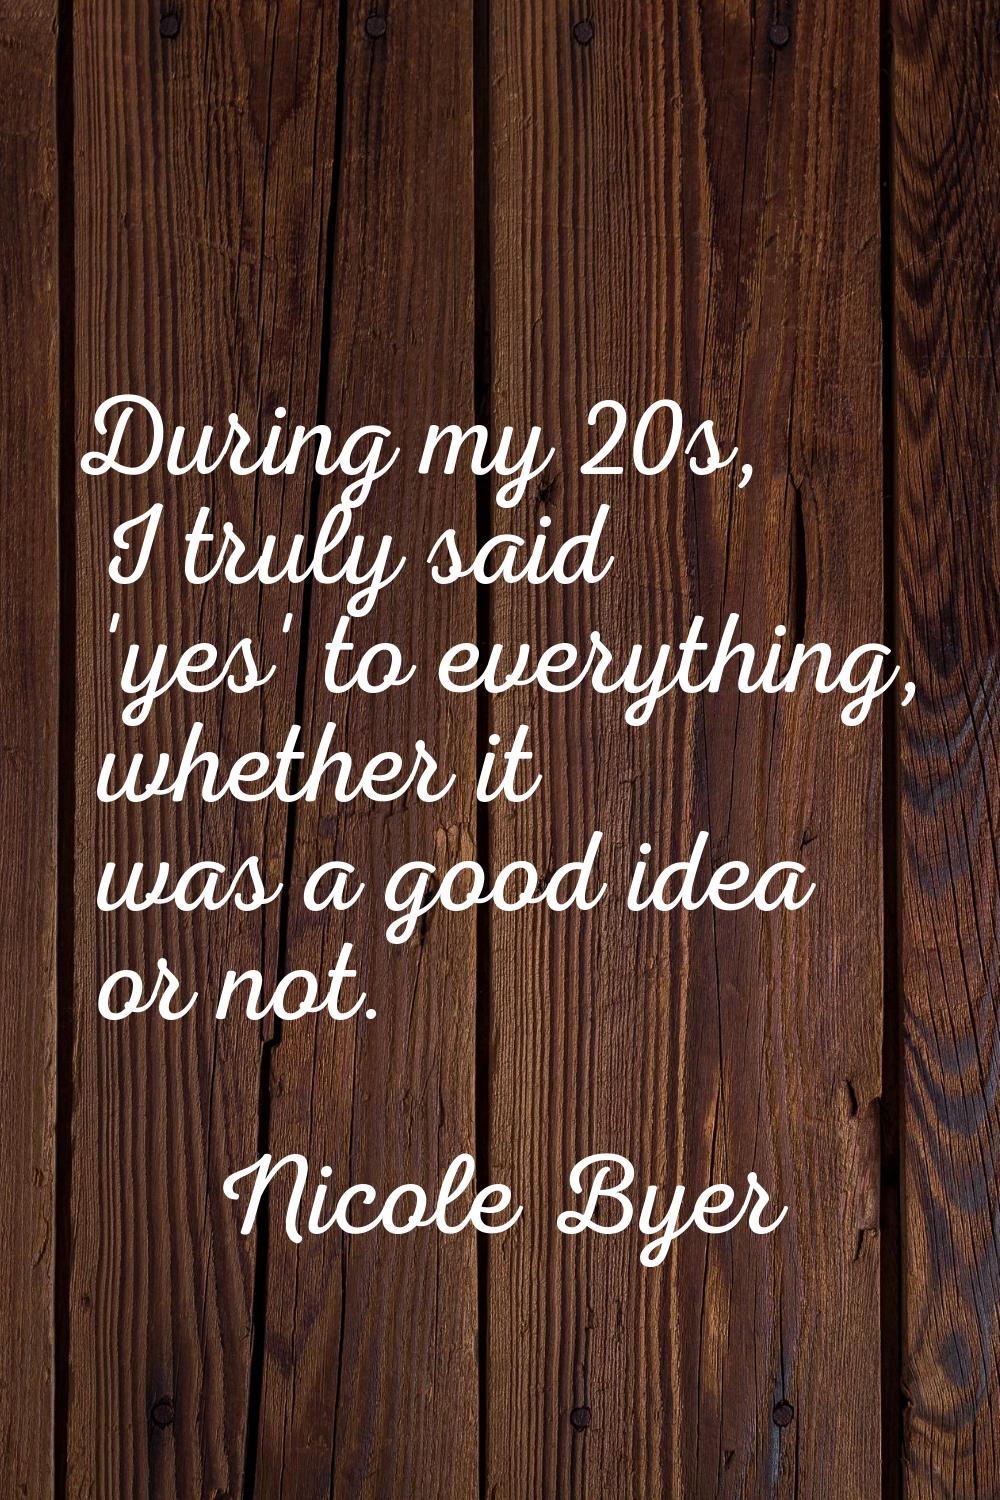 During my 20s, I truly said 'yes' to everything, whether it was a good idea or not.